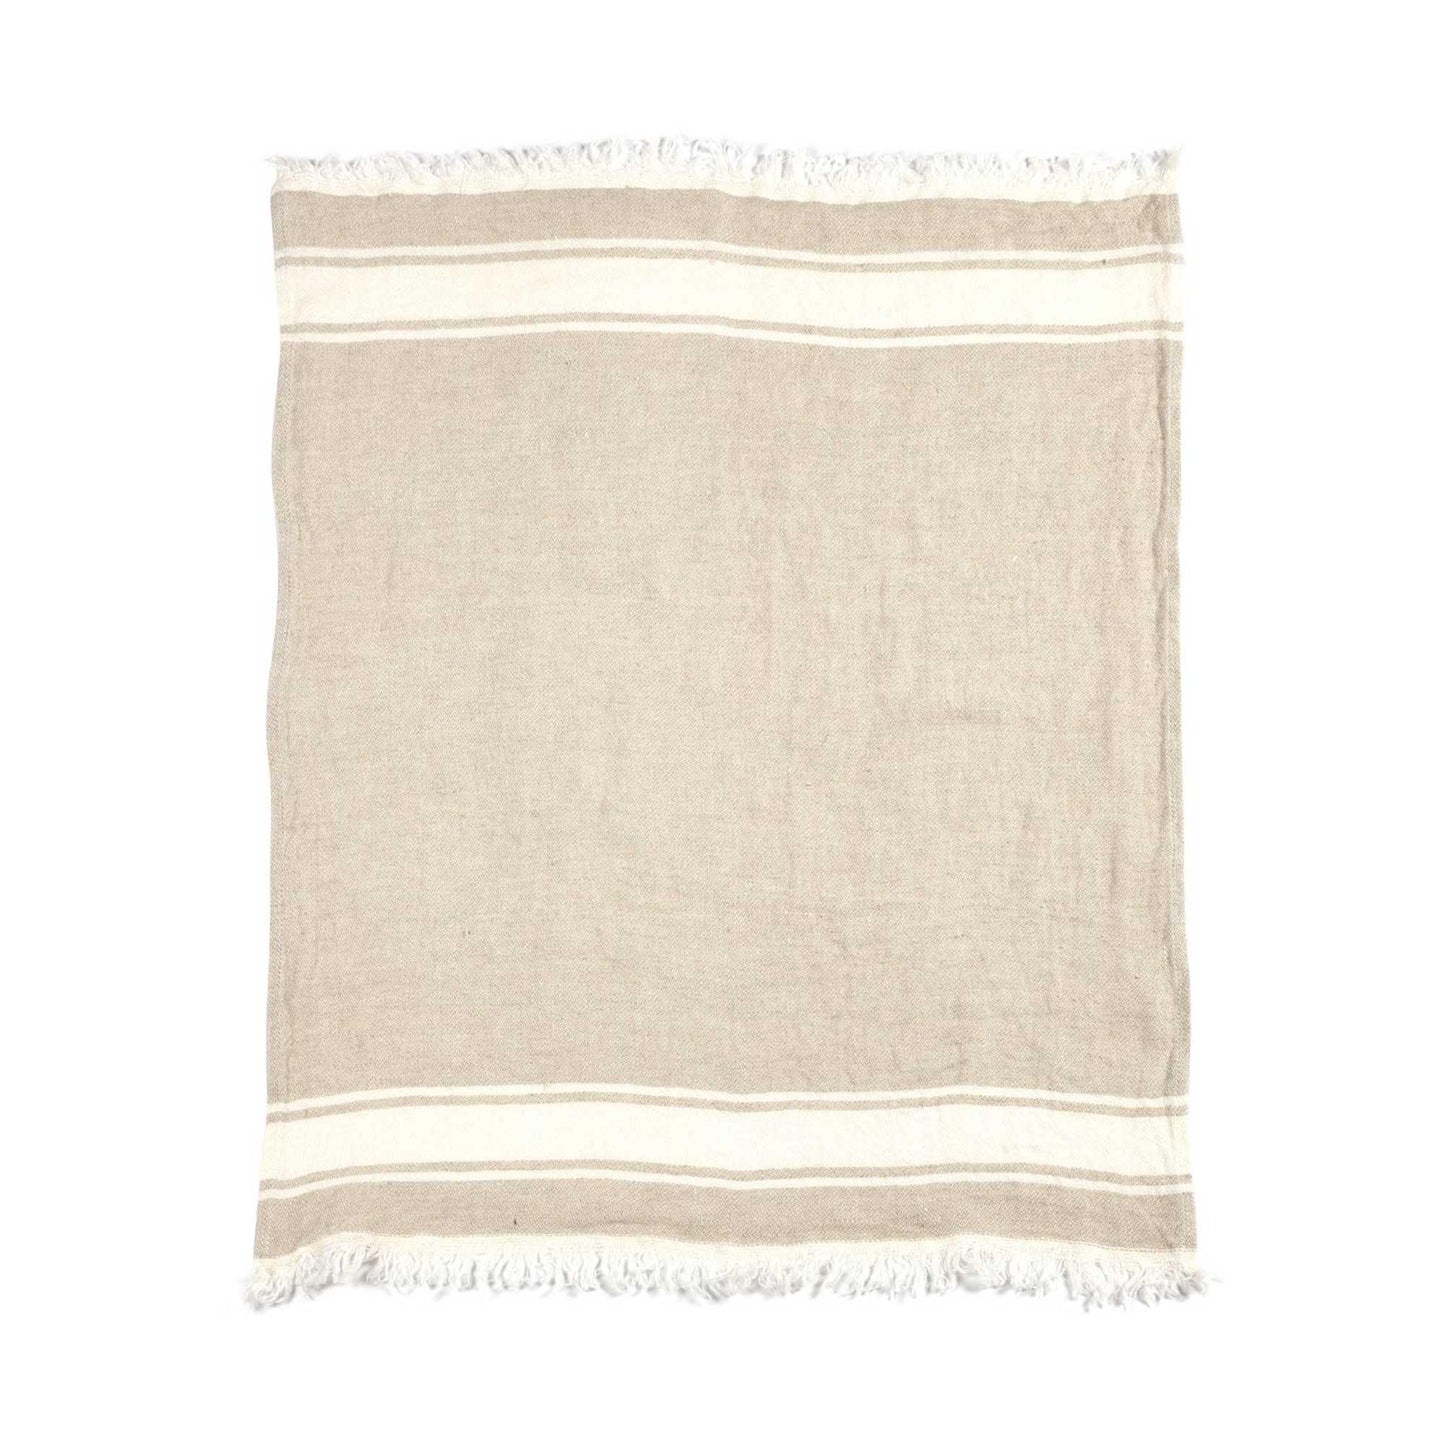 Belgian linen fouta throw blanket flat lay product shot in color Flax by Libeco for South Hous.